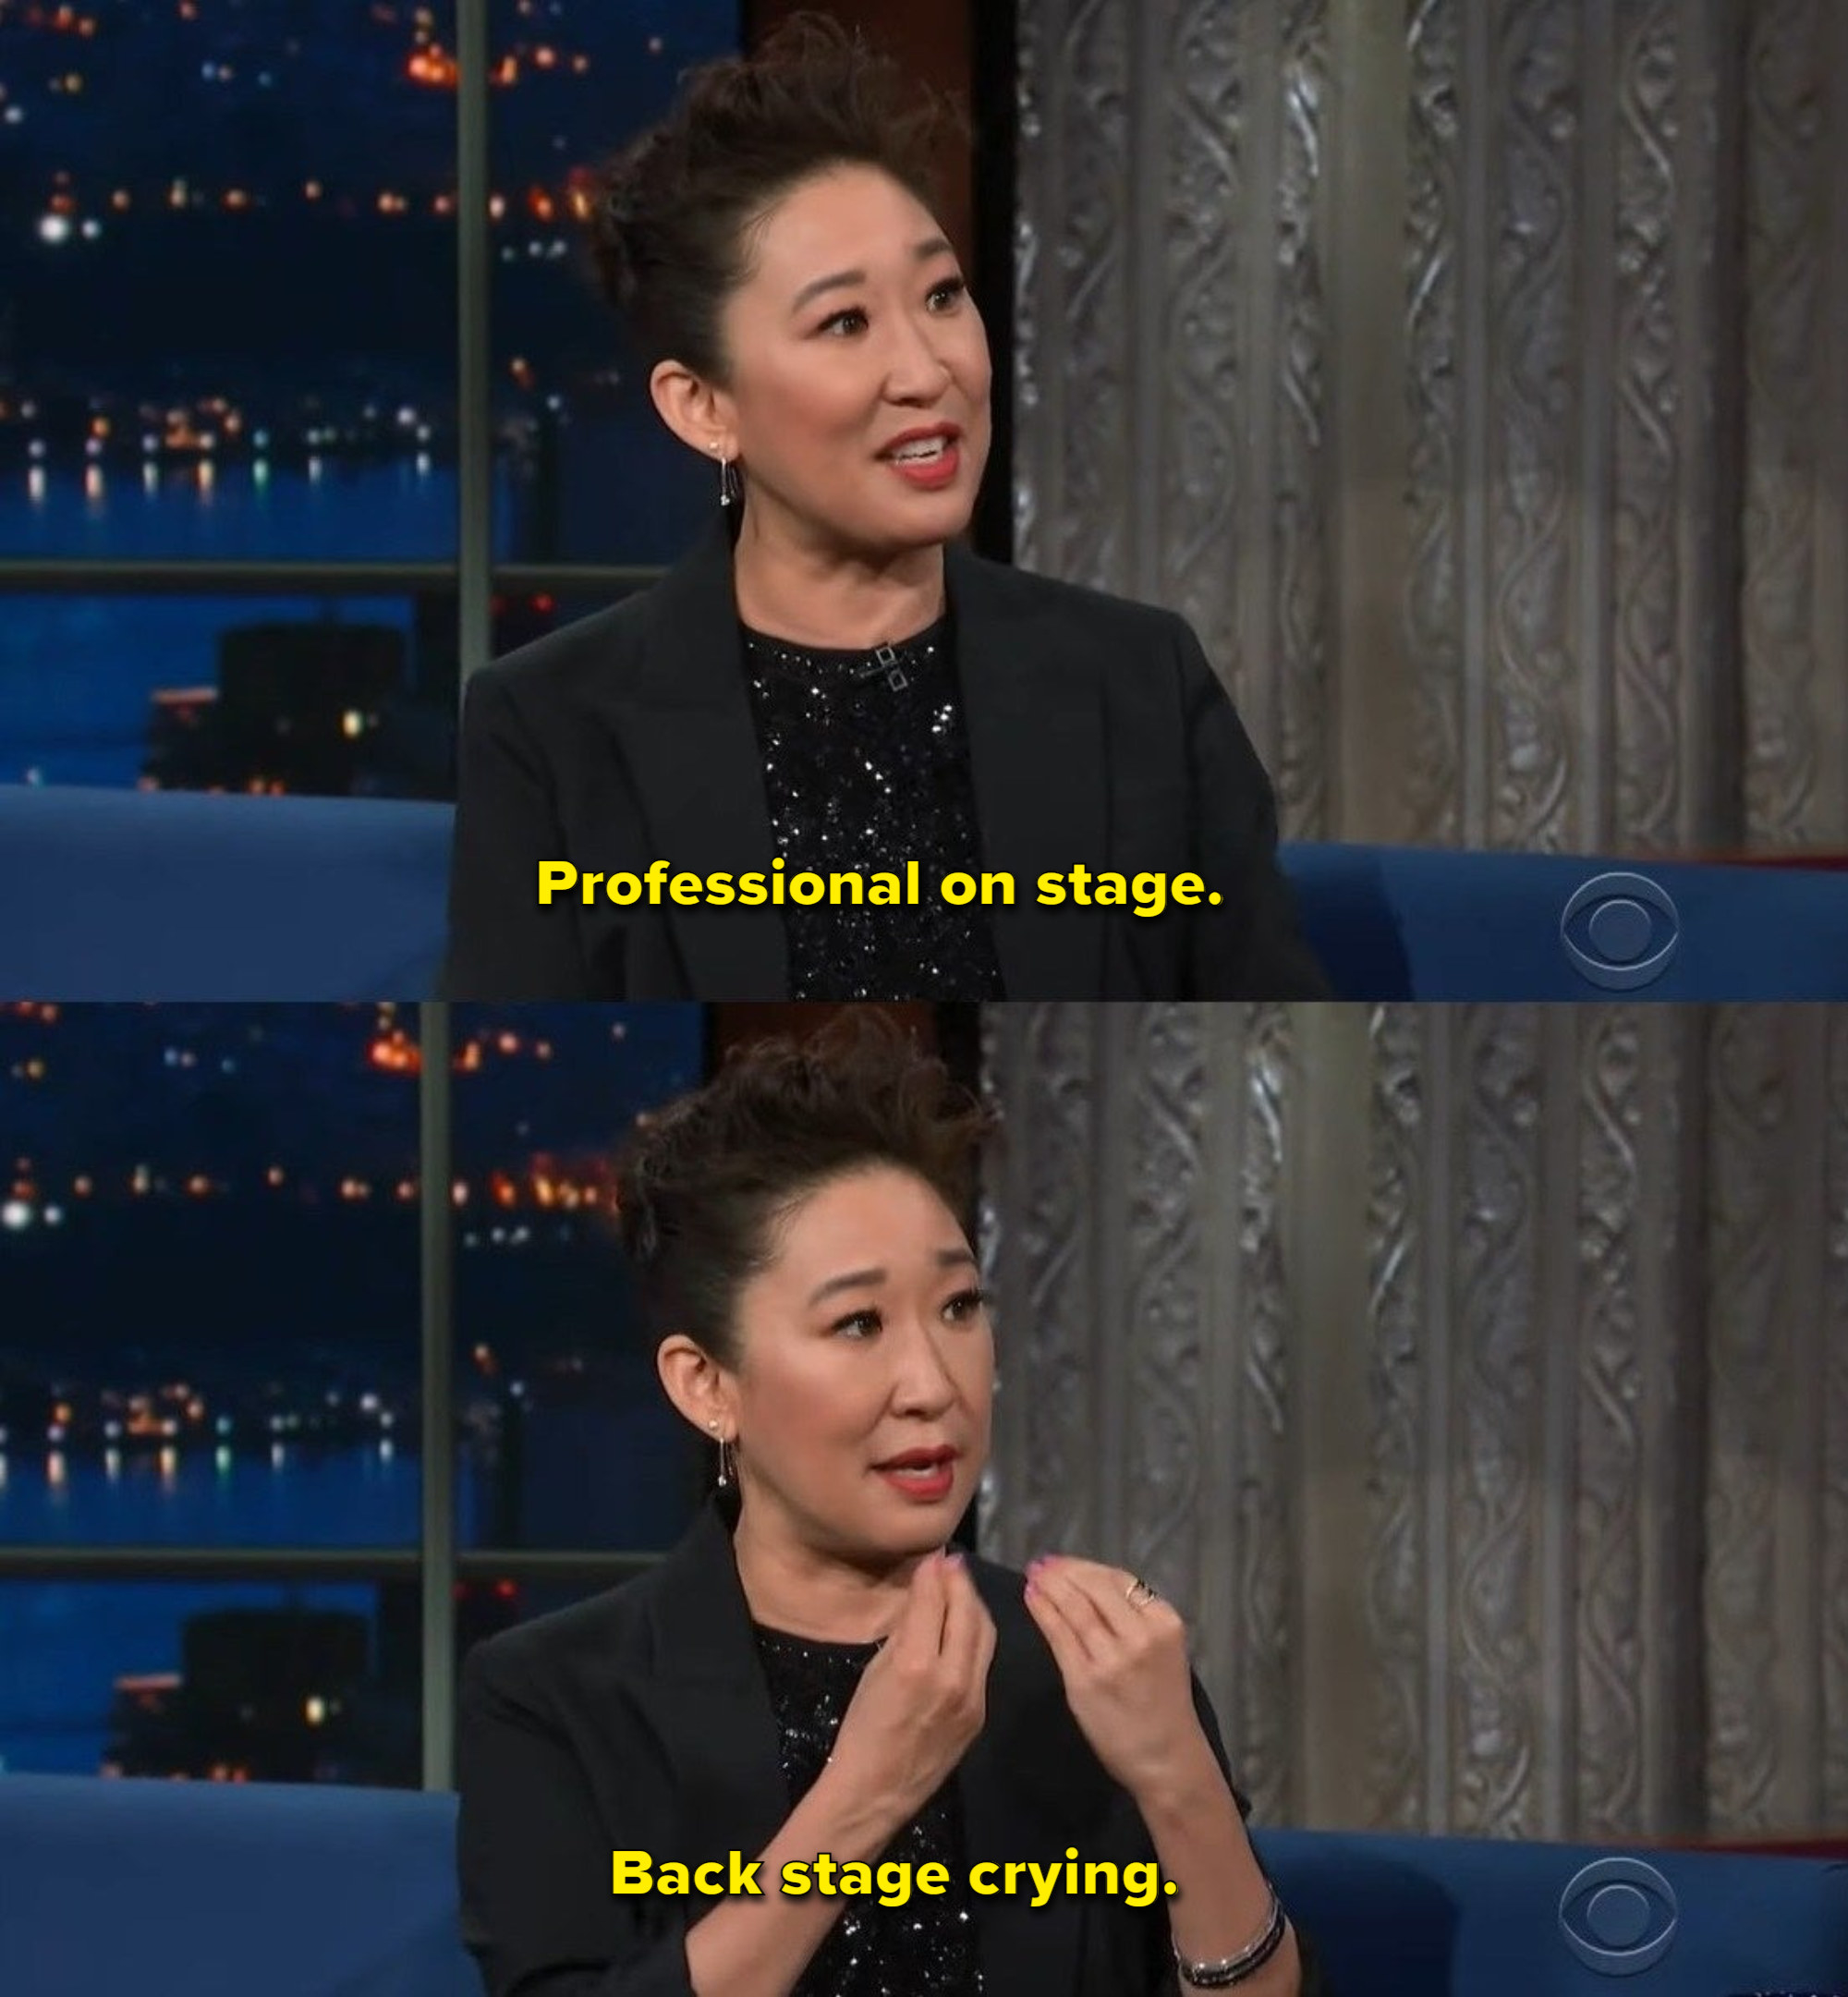 Sandra Oh: &quot;Professional on stage and back stage crying&quot;